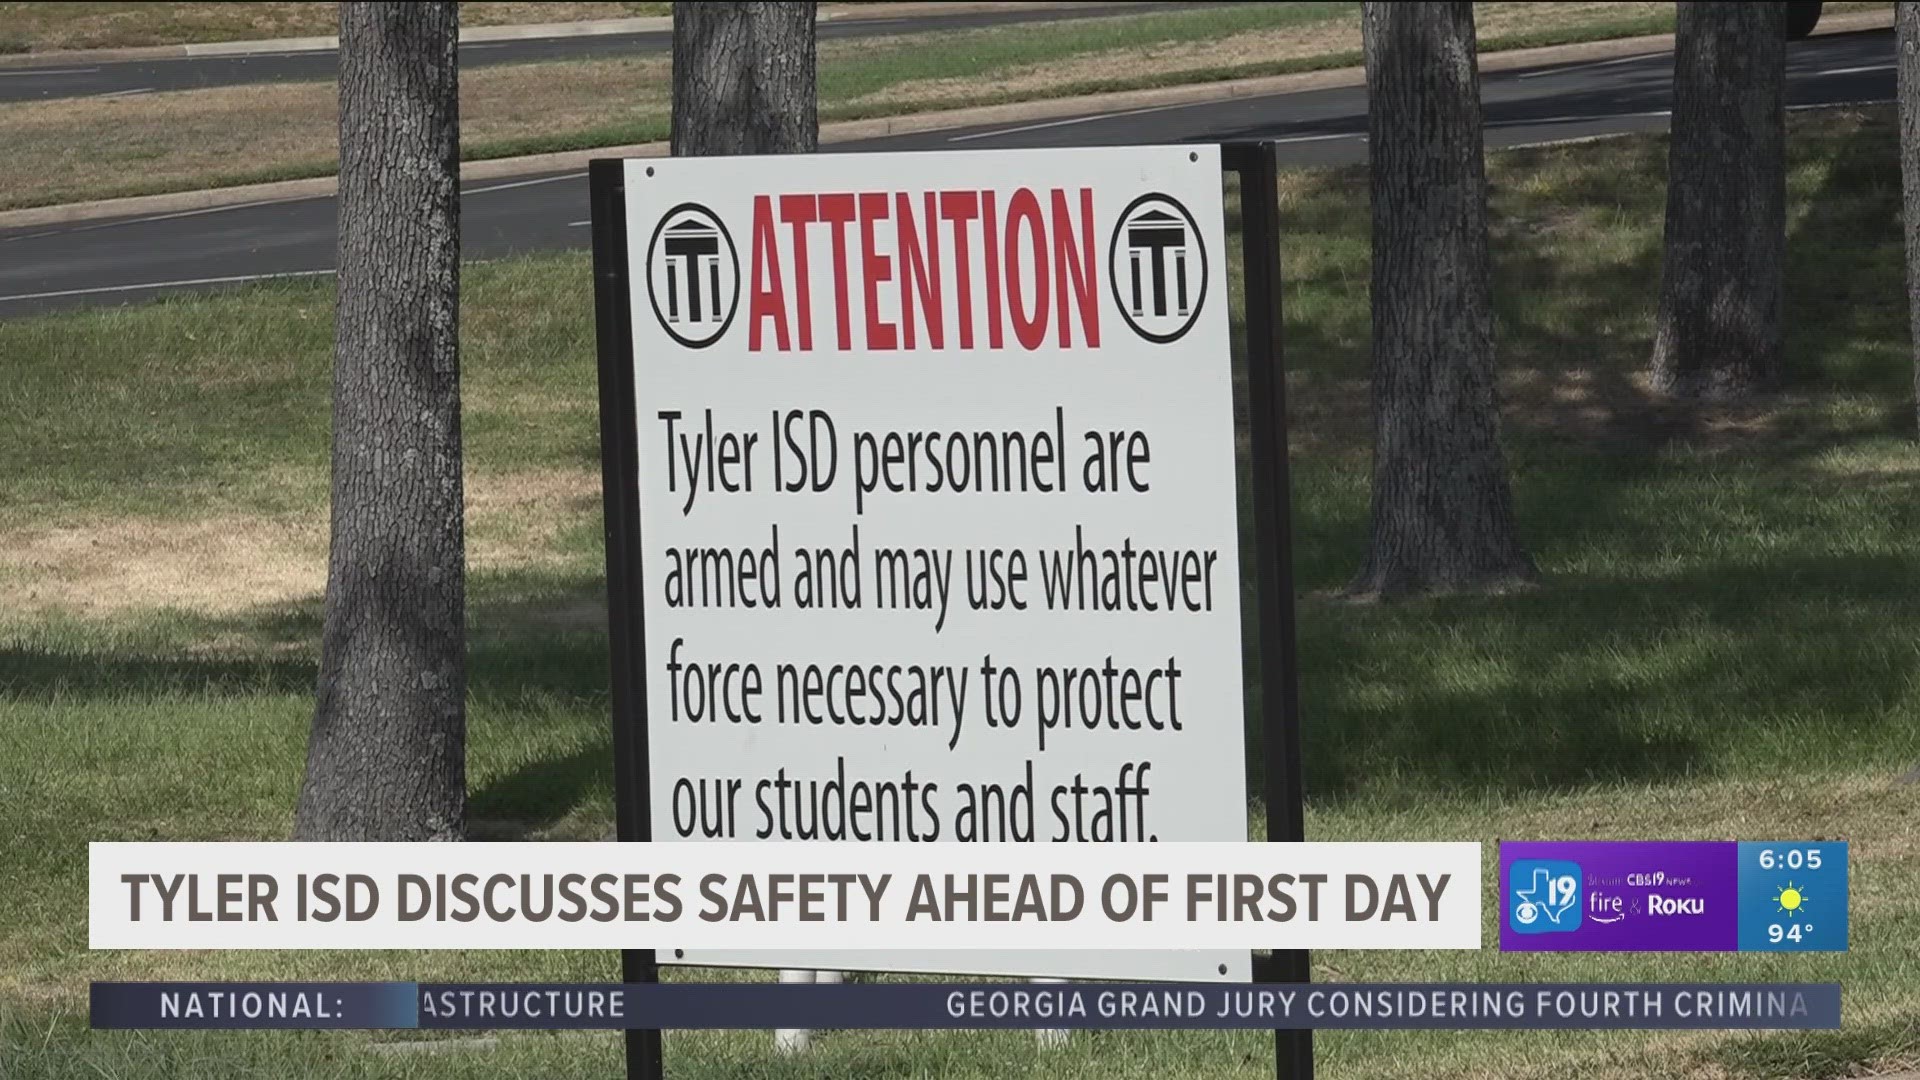 18,500 Tyler ISD students will be starting a new school year tomorrow, the most the district has ever seen.